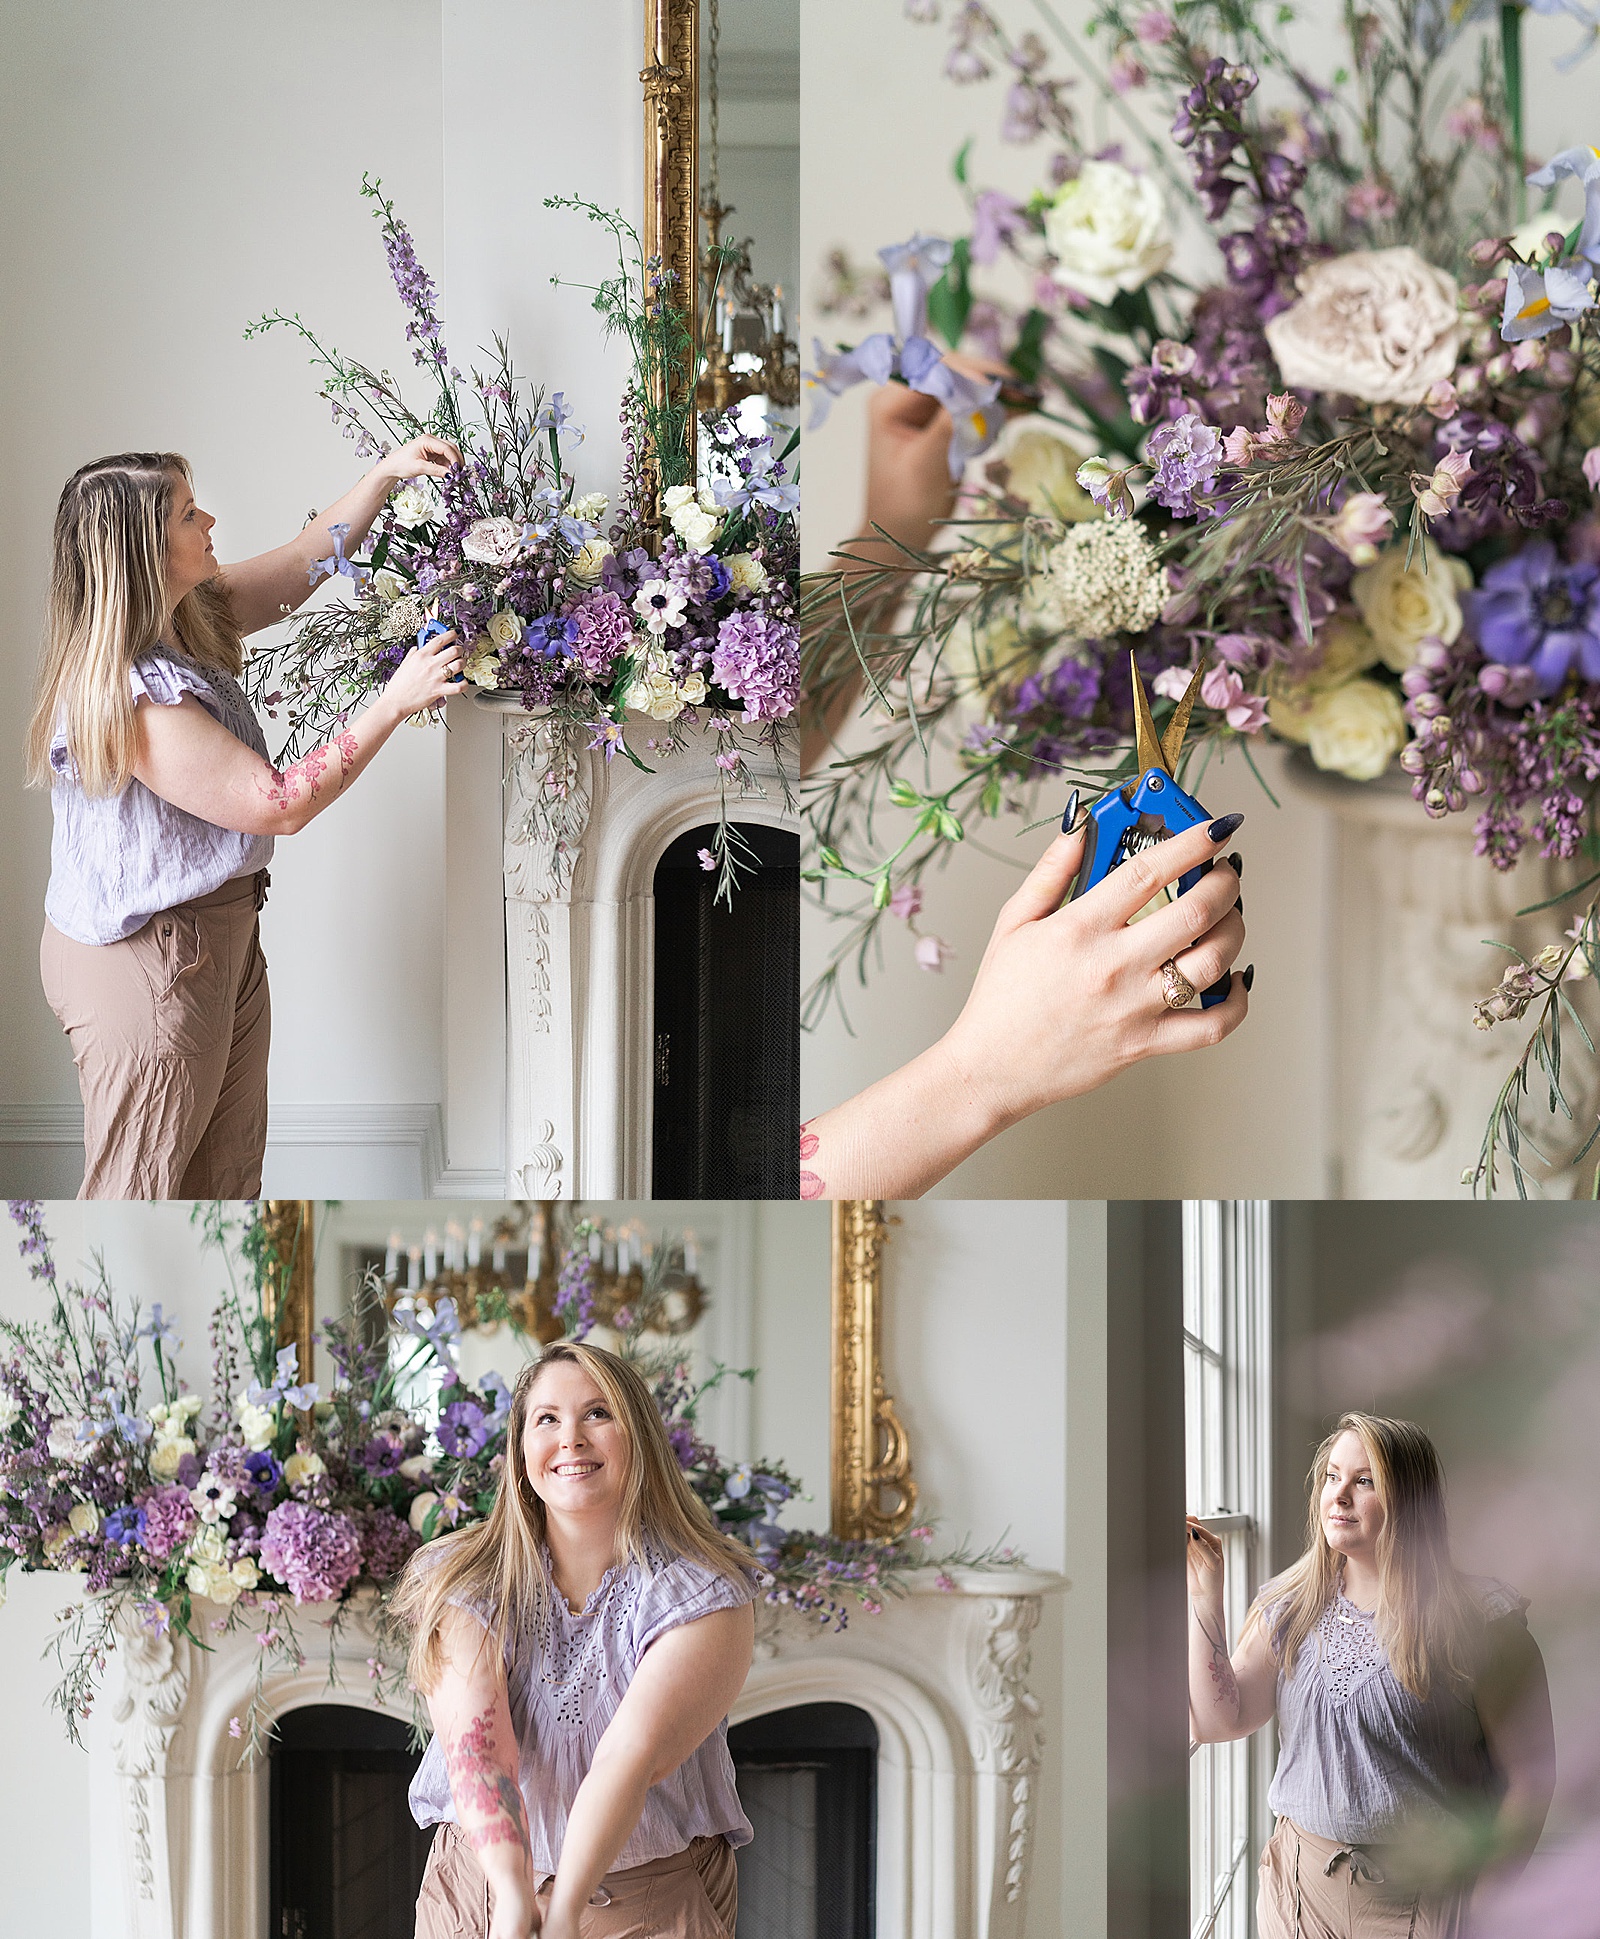 Woman works to install floral bouquets by Amanda Bee’s Floral Design